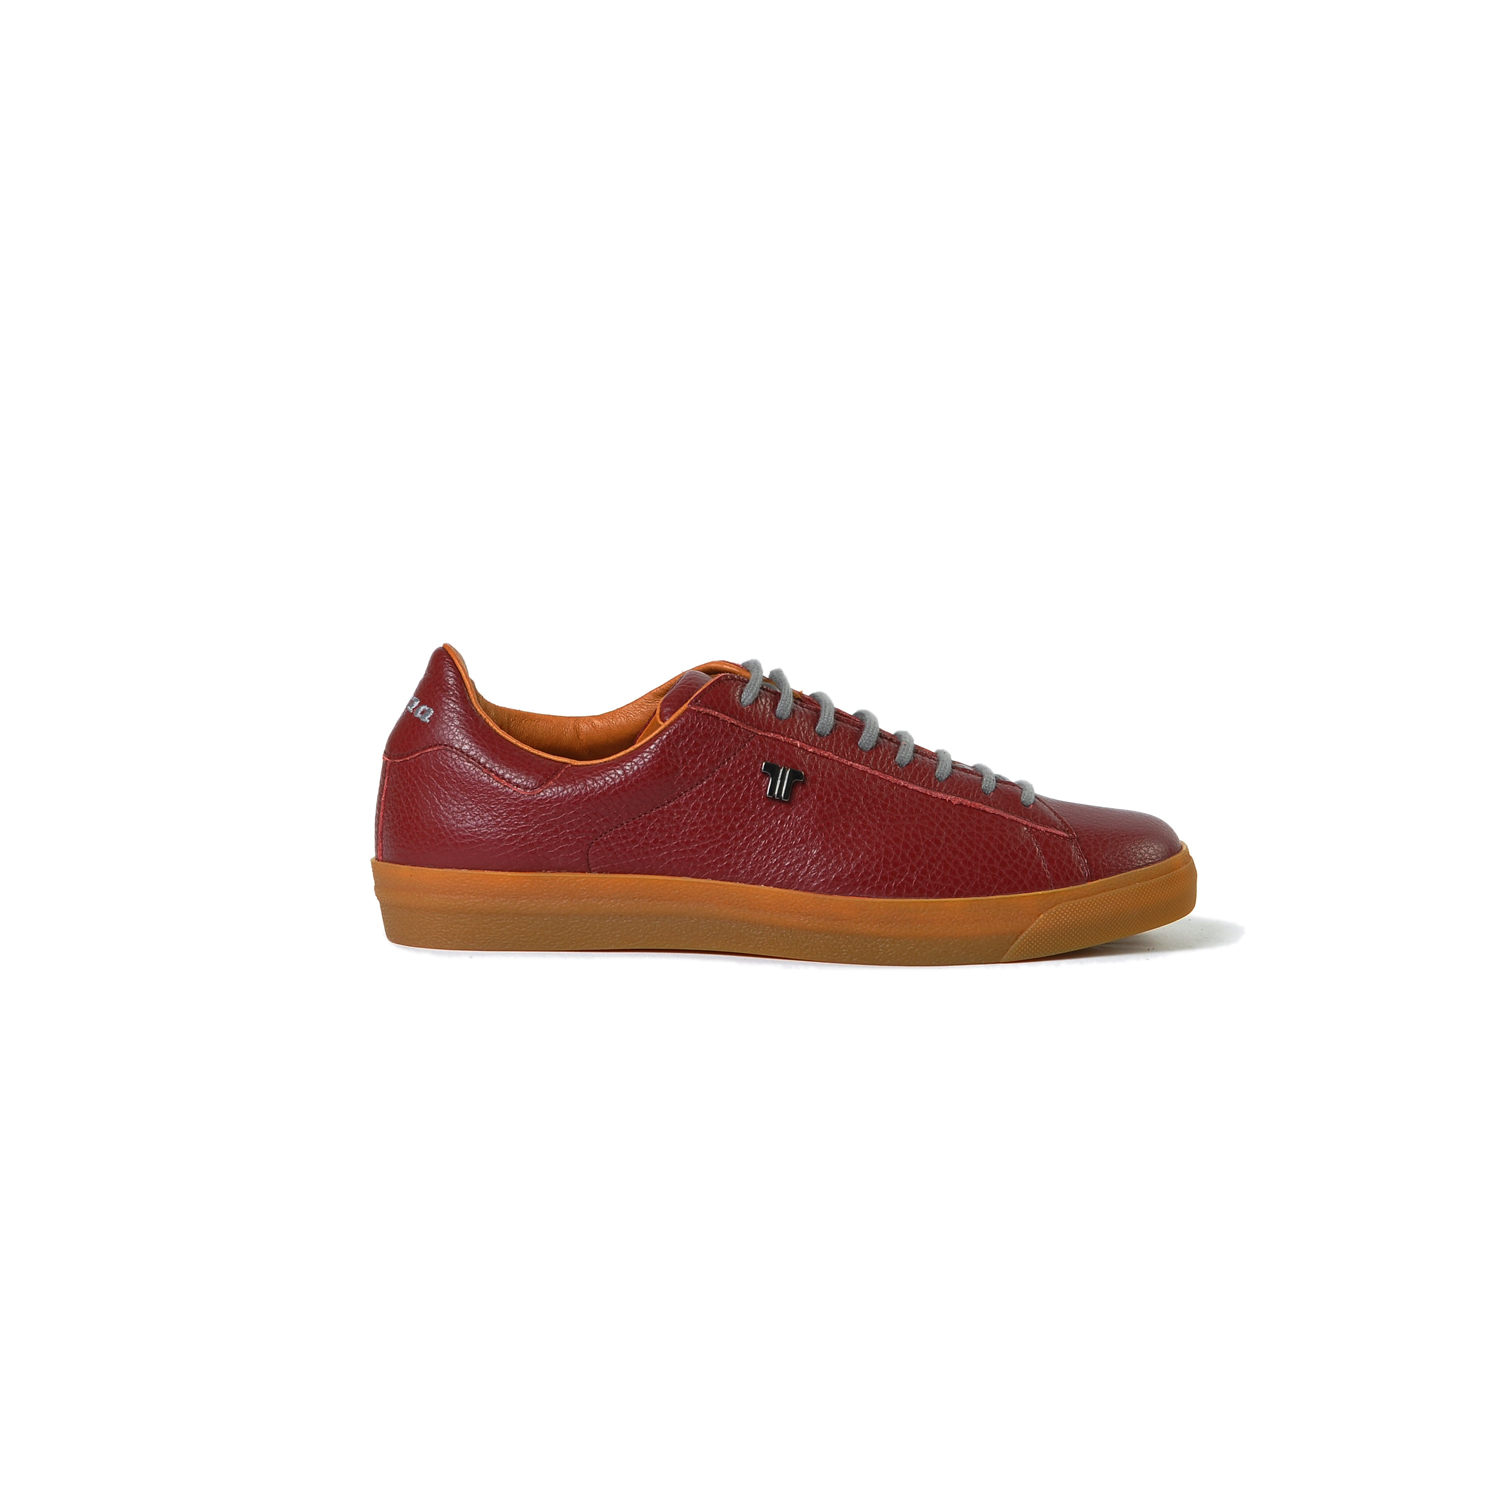 Tisza shoes - Simple - Burgundy